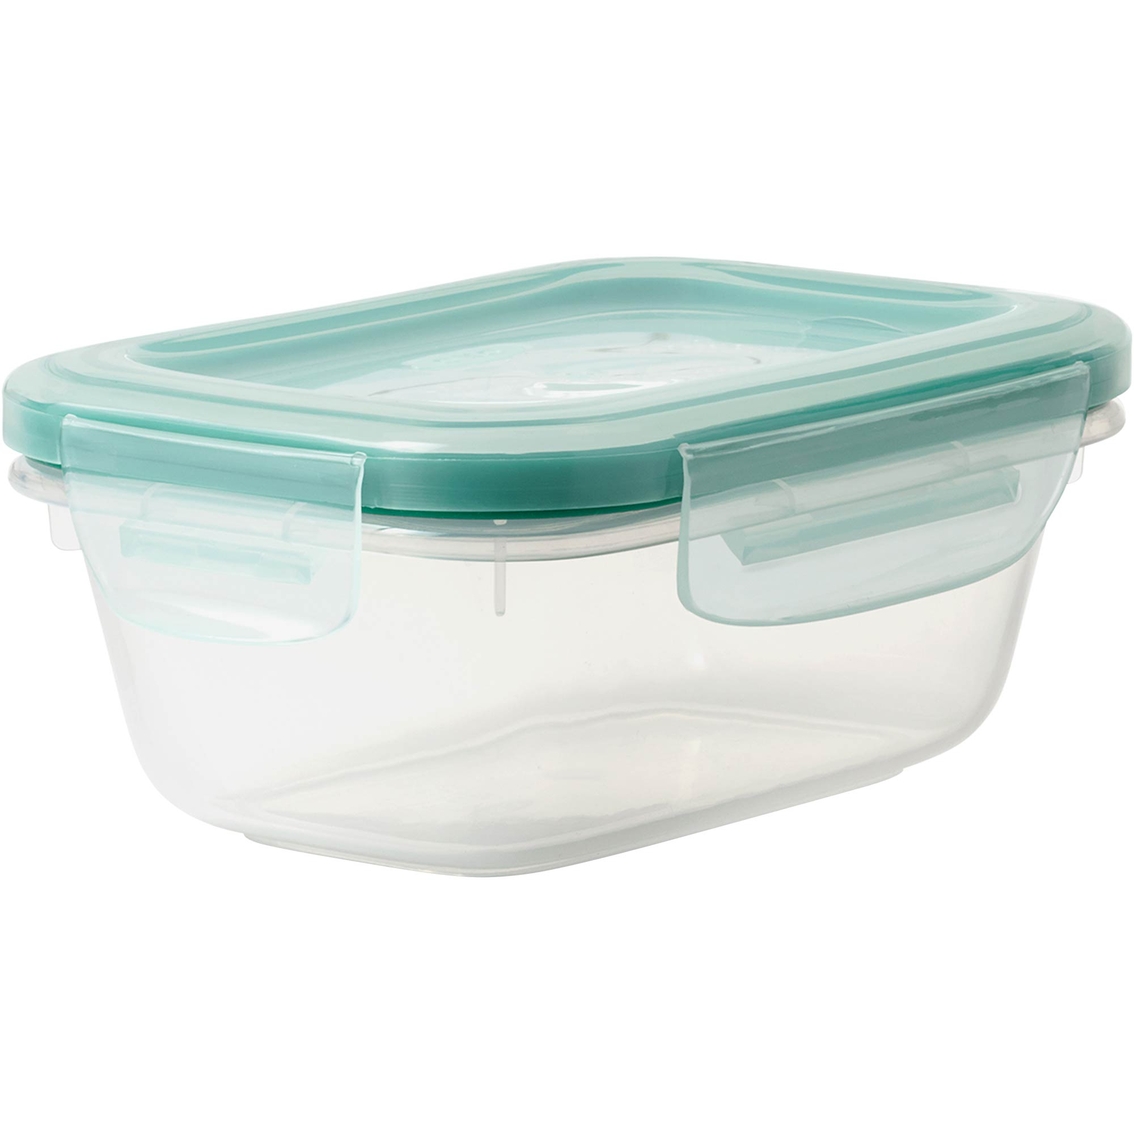 OXO Good Grips SNAP 1.6 Cup Plastic Food Storage Container